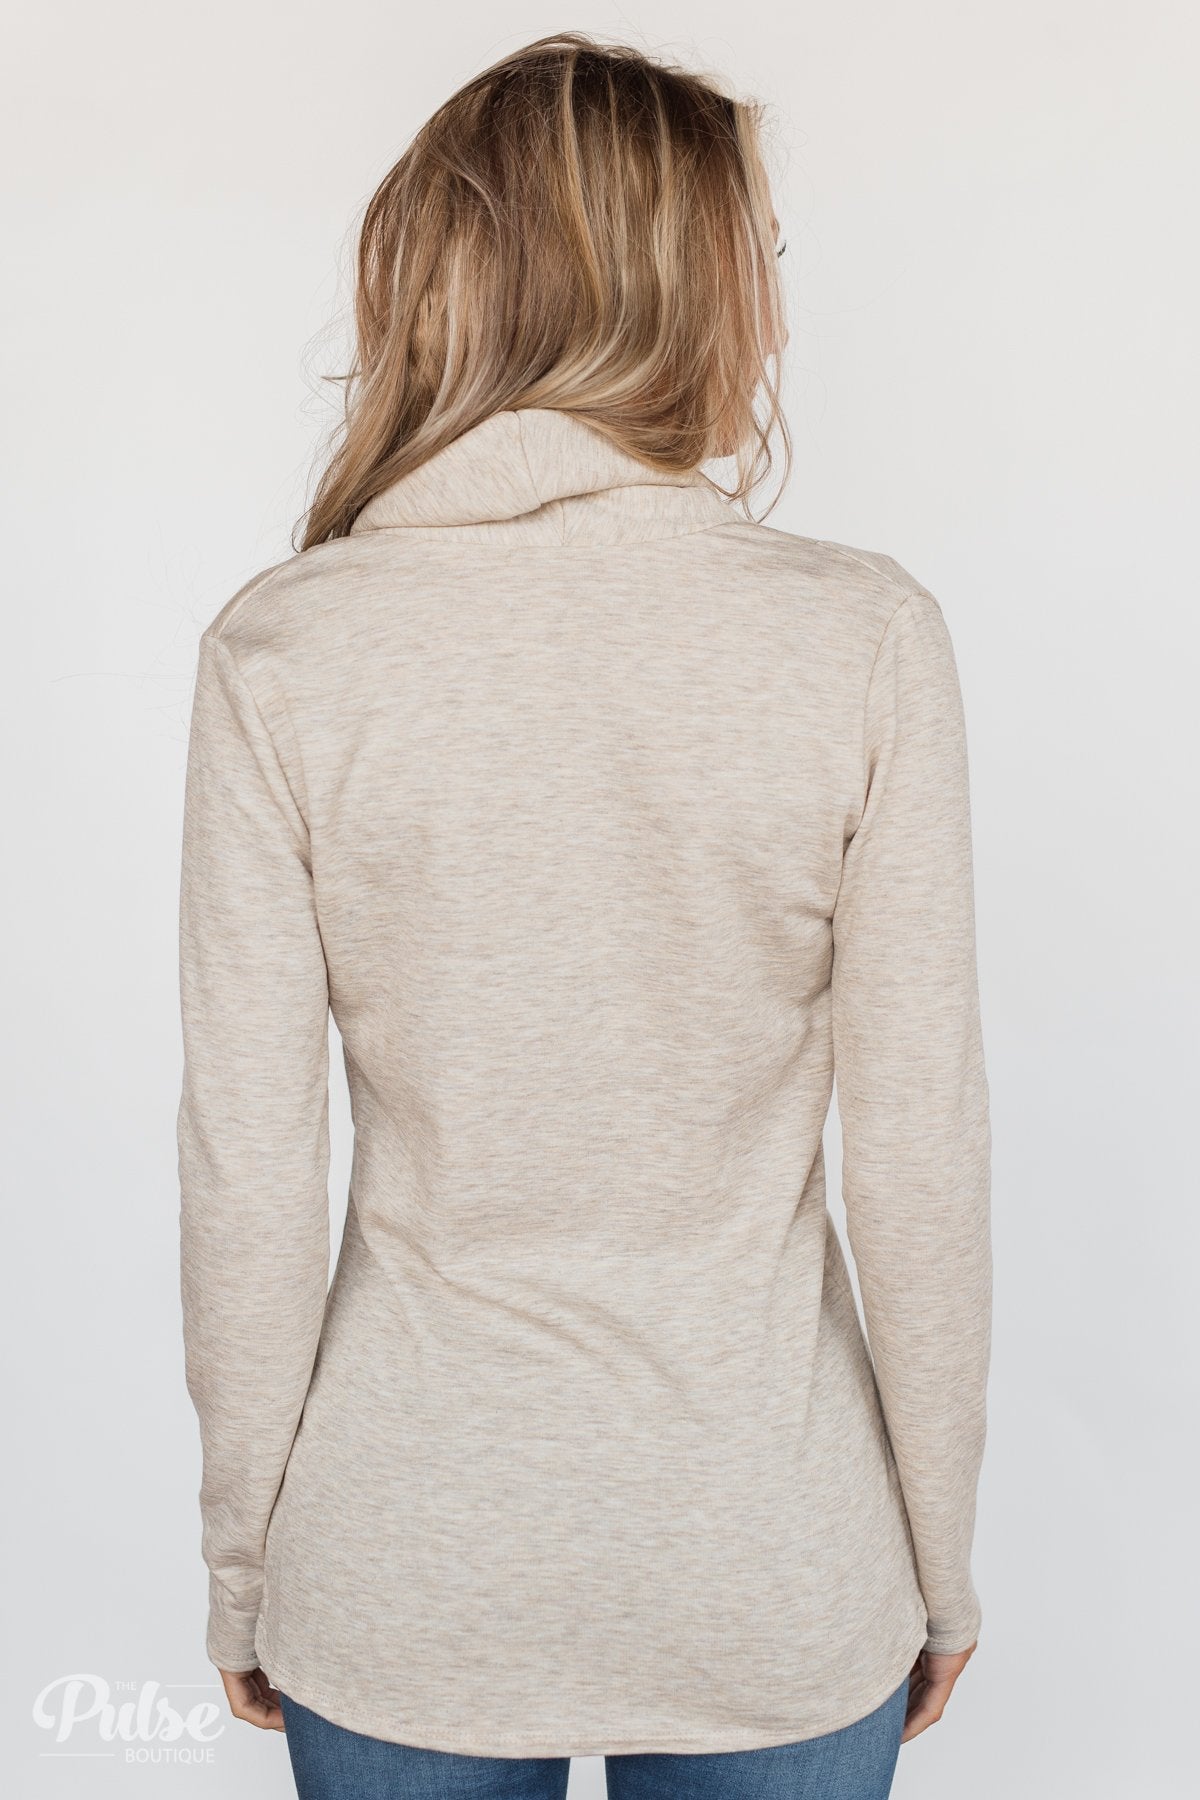 The Perfect Occasion Jacket- Oatmeal